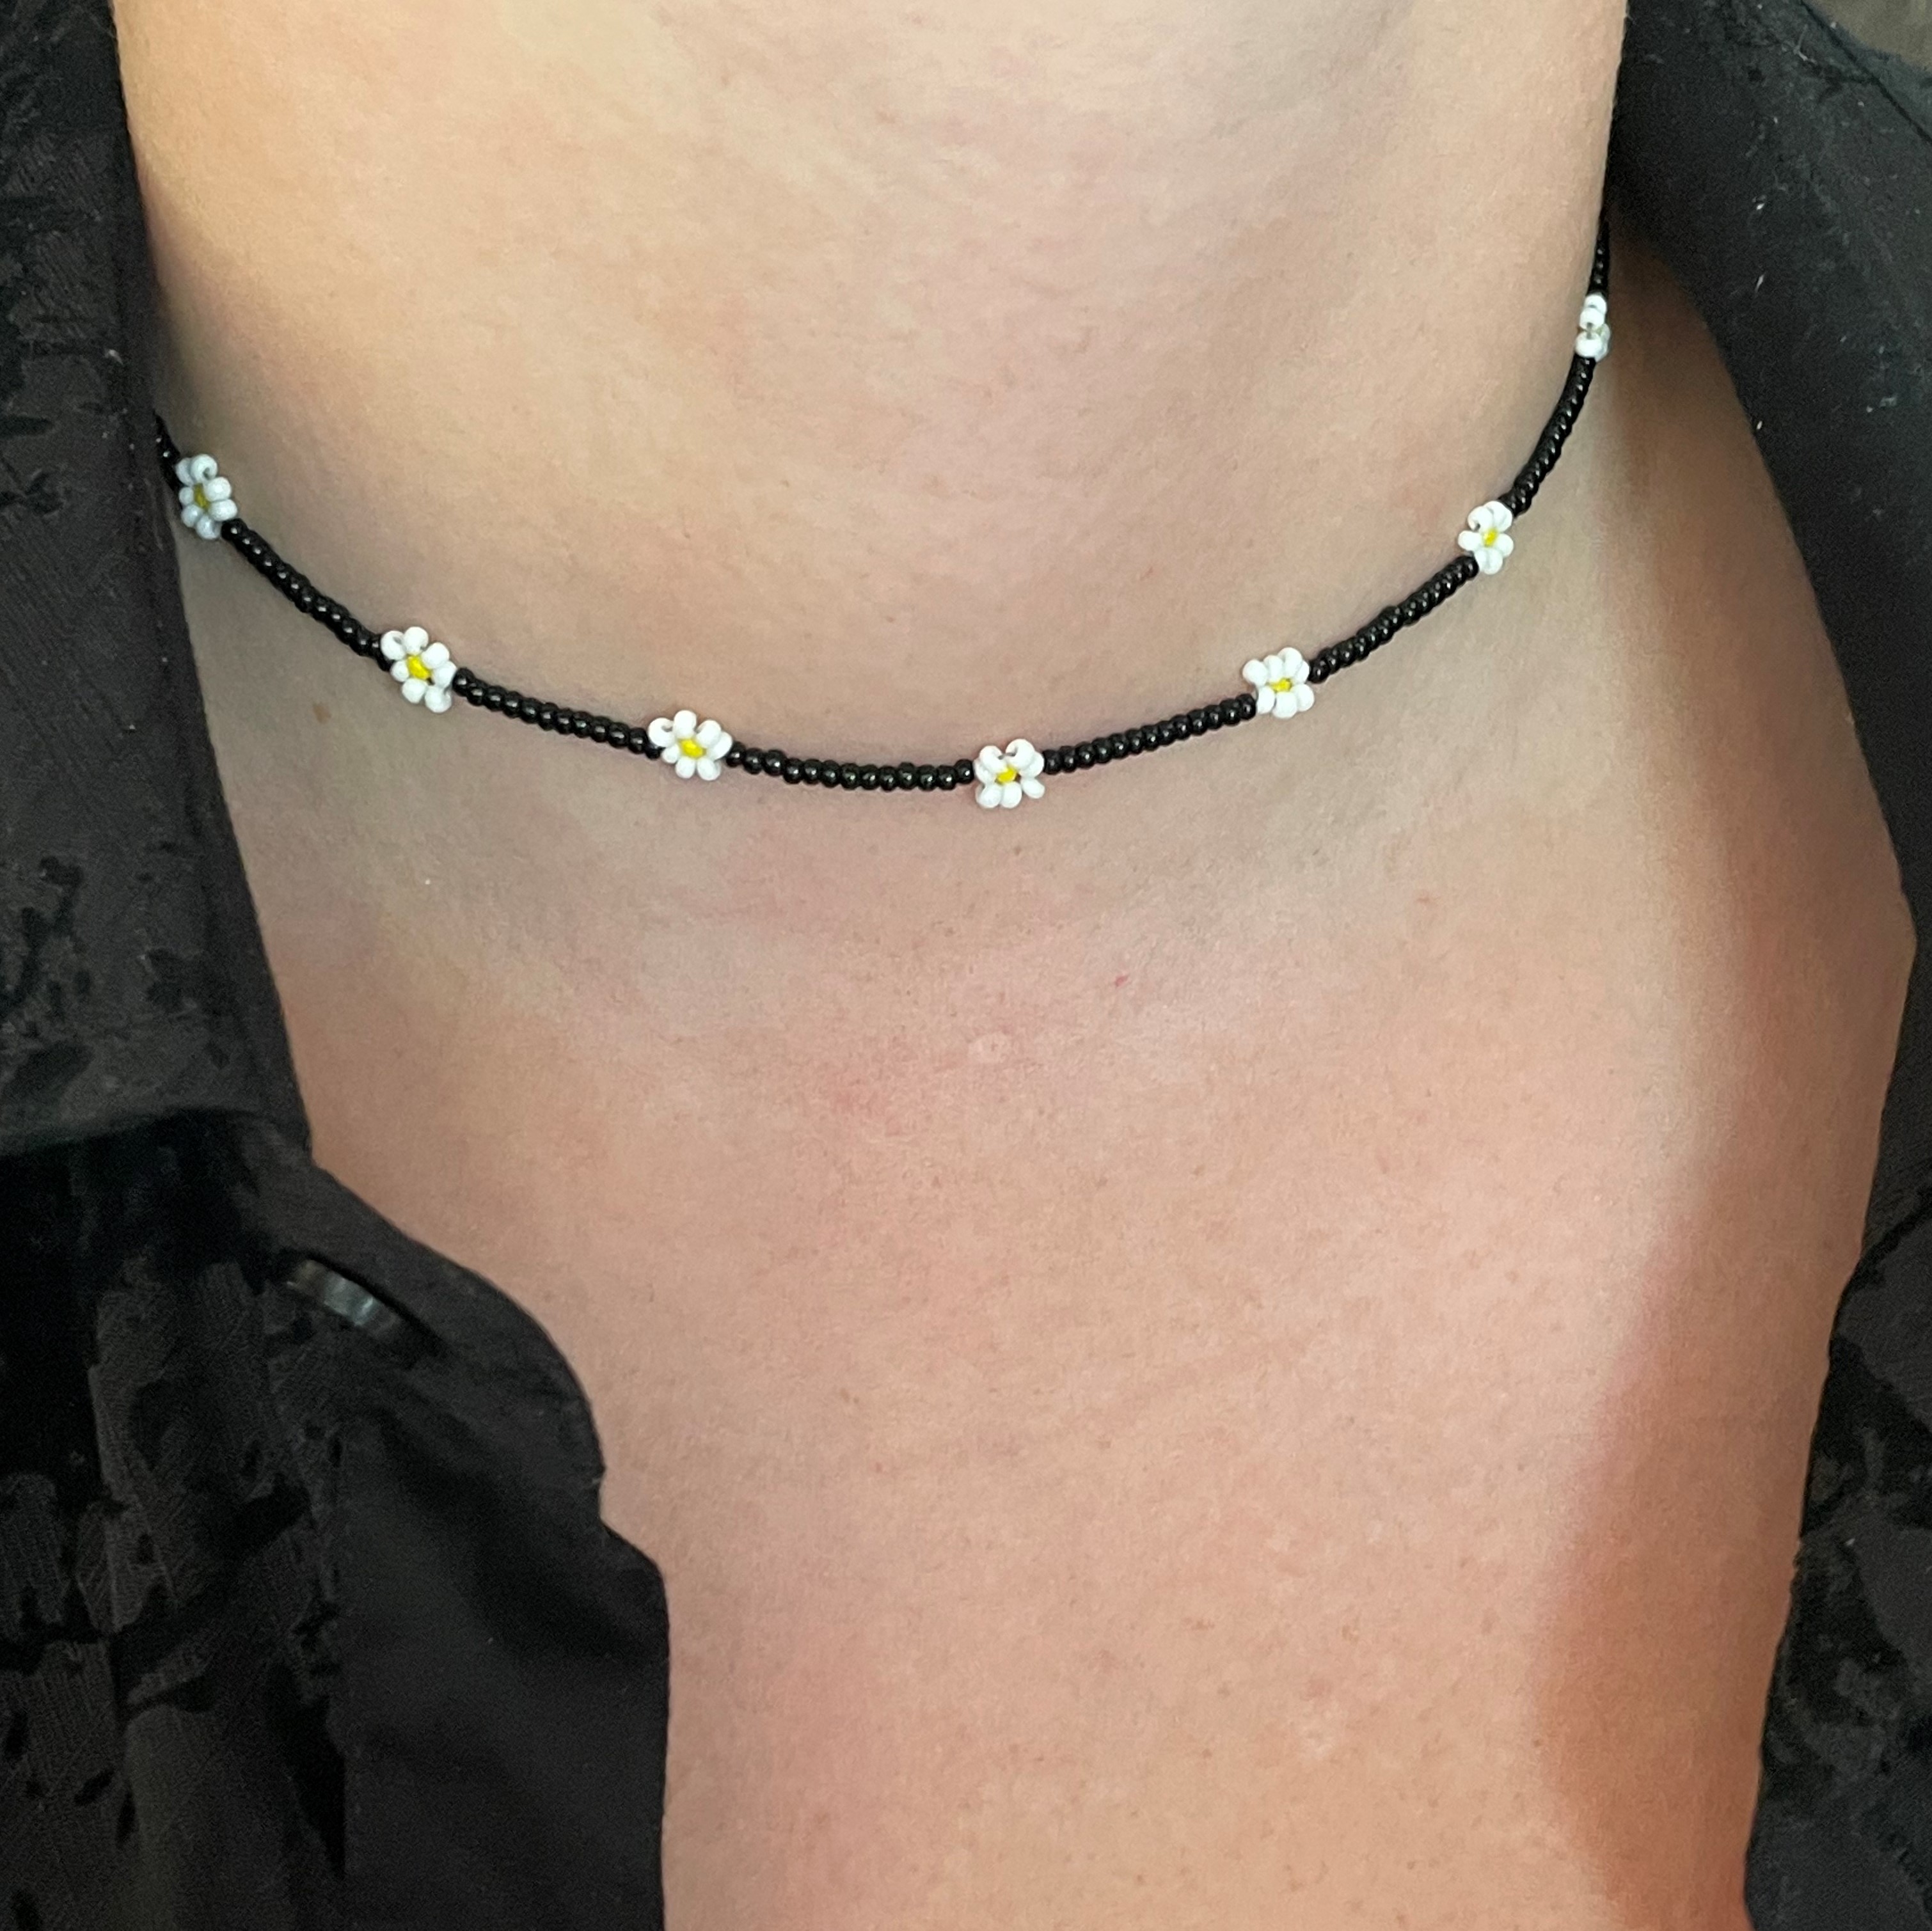 Sammenligne Hollywood Uskyld Daisy Chain Choker/ Beaded Flower Choker Necklace/ Kidcore Super Cute  Fashionista Jewelry/ Hand Crafted Made in USA – Just Bead It